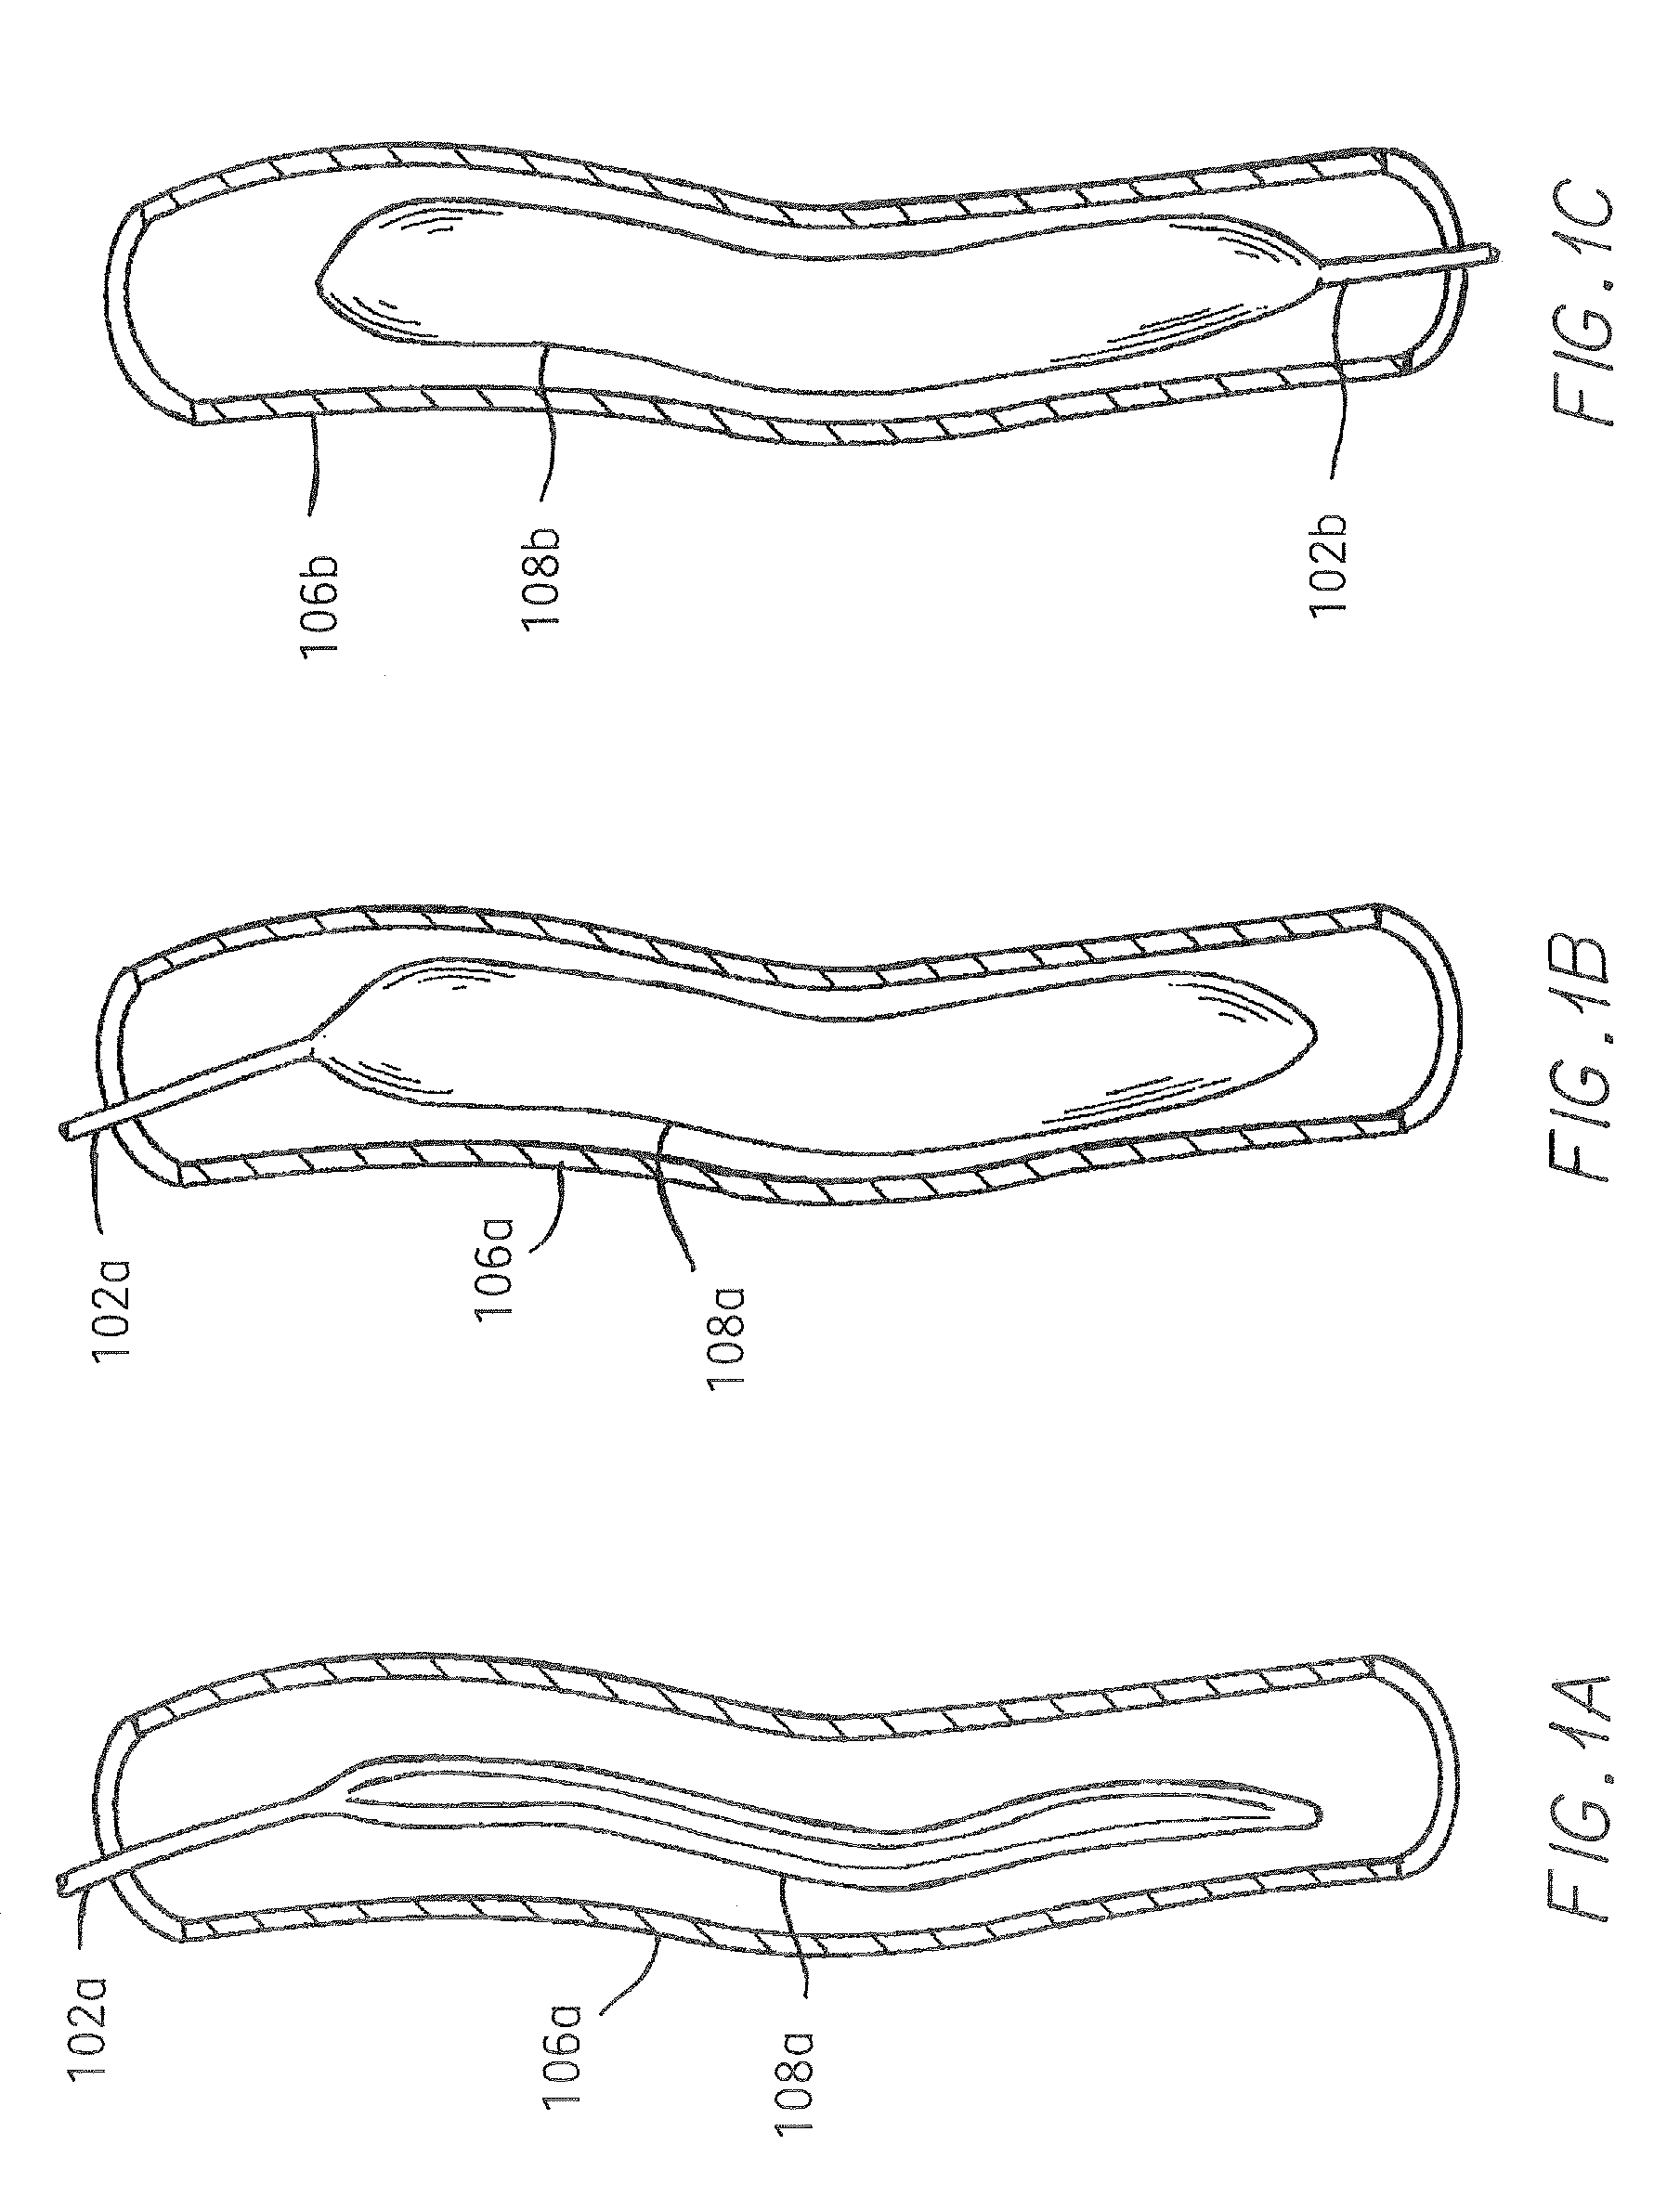 Methods of making aortic counter pulsation cardiac assist devices with three dimensional tortuous shape